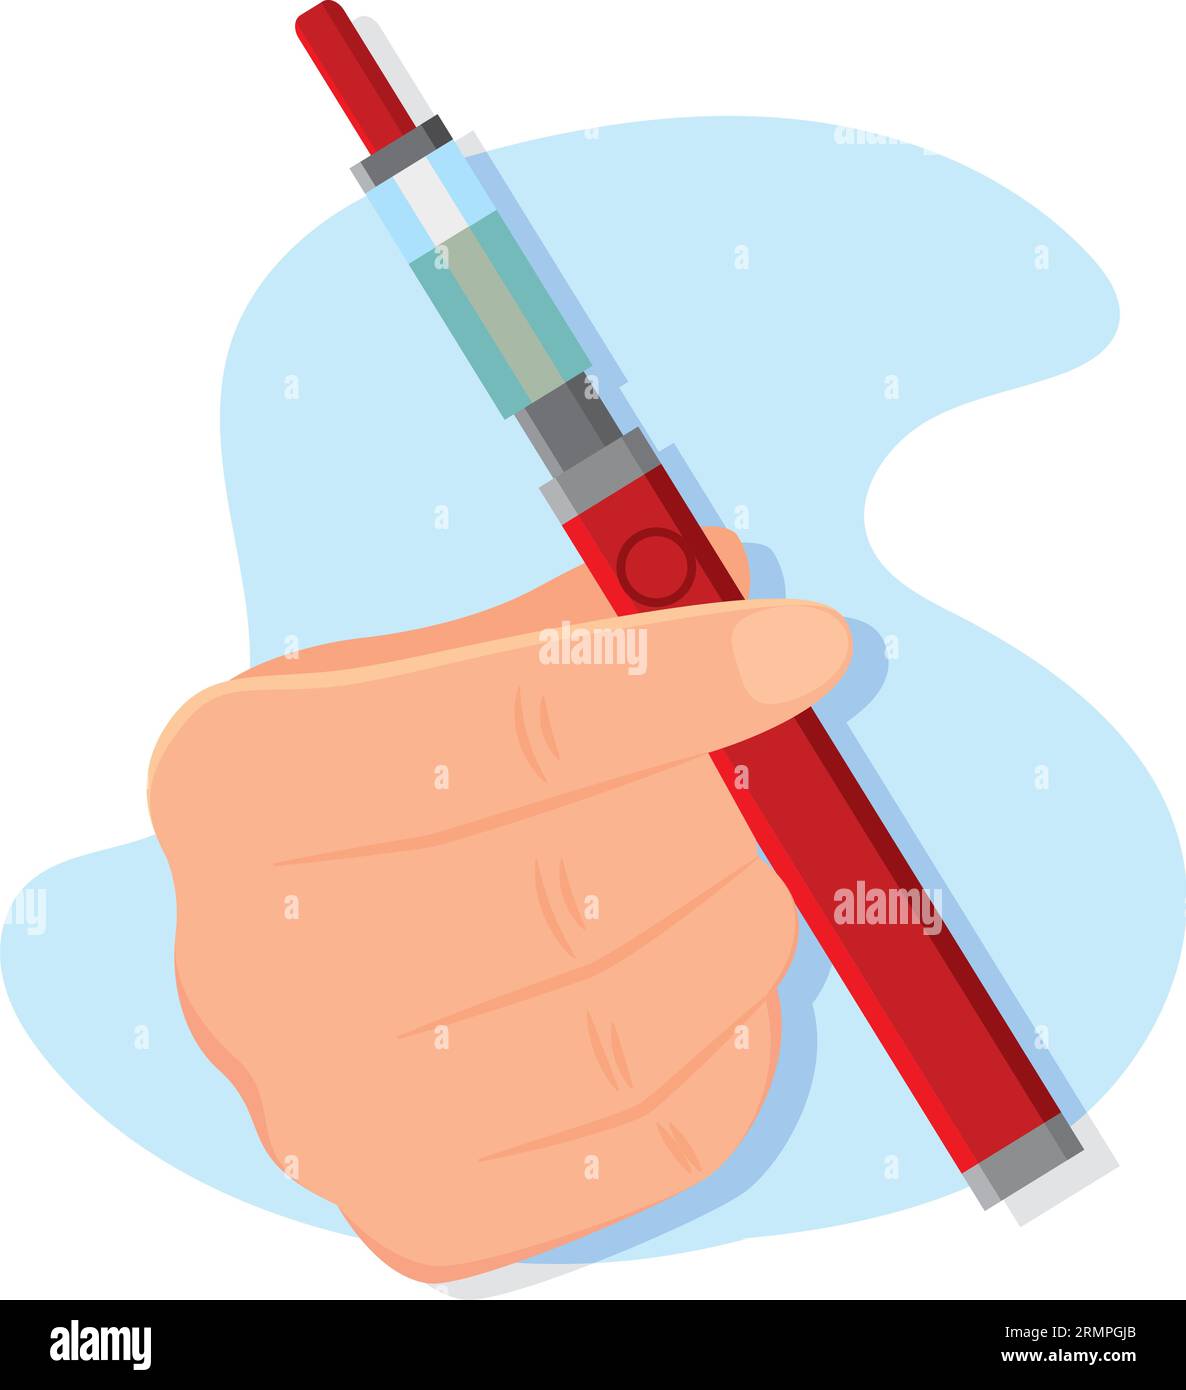 Isolated hand holding an e-cigarette Vector Stock Vector